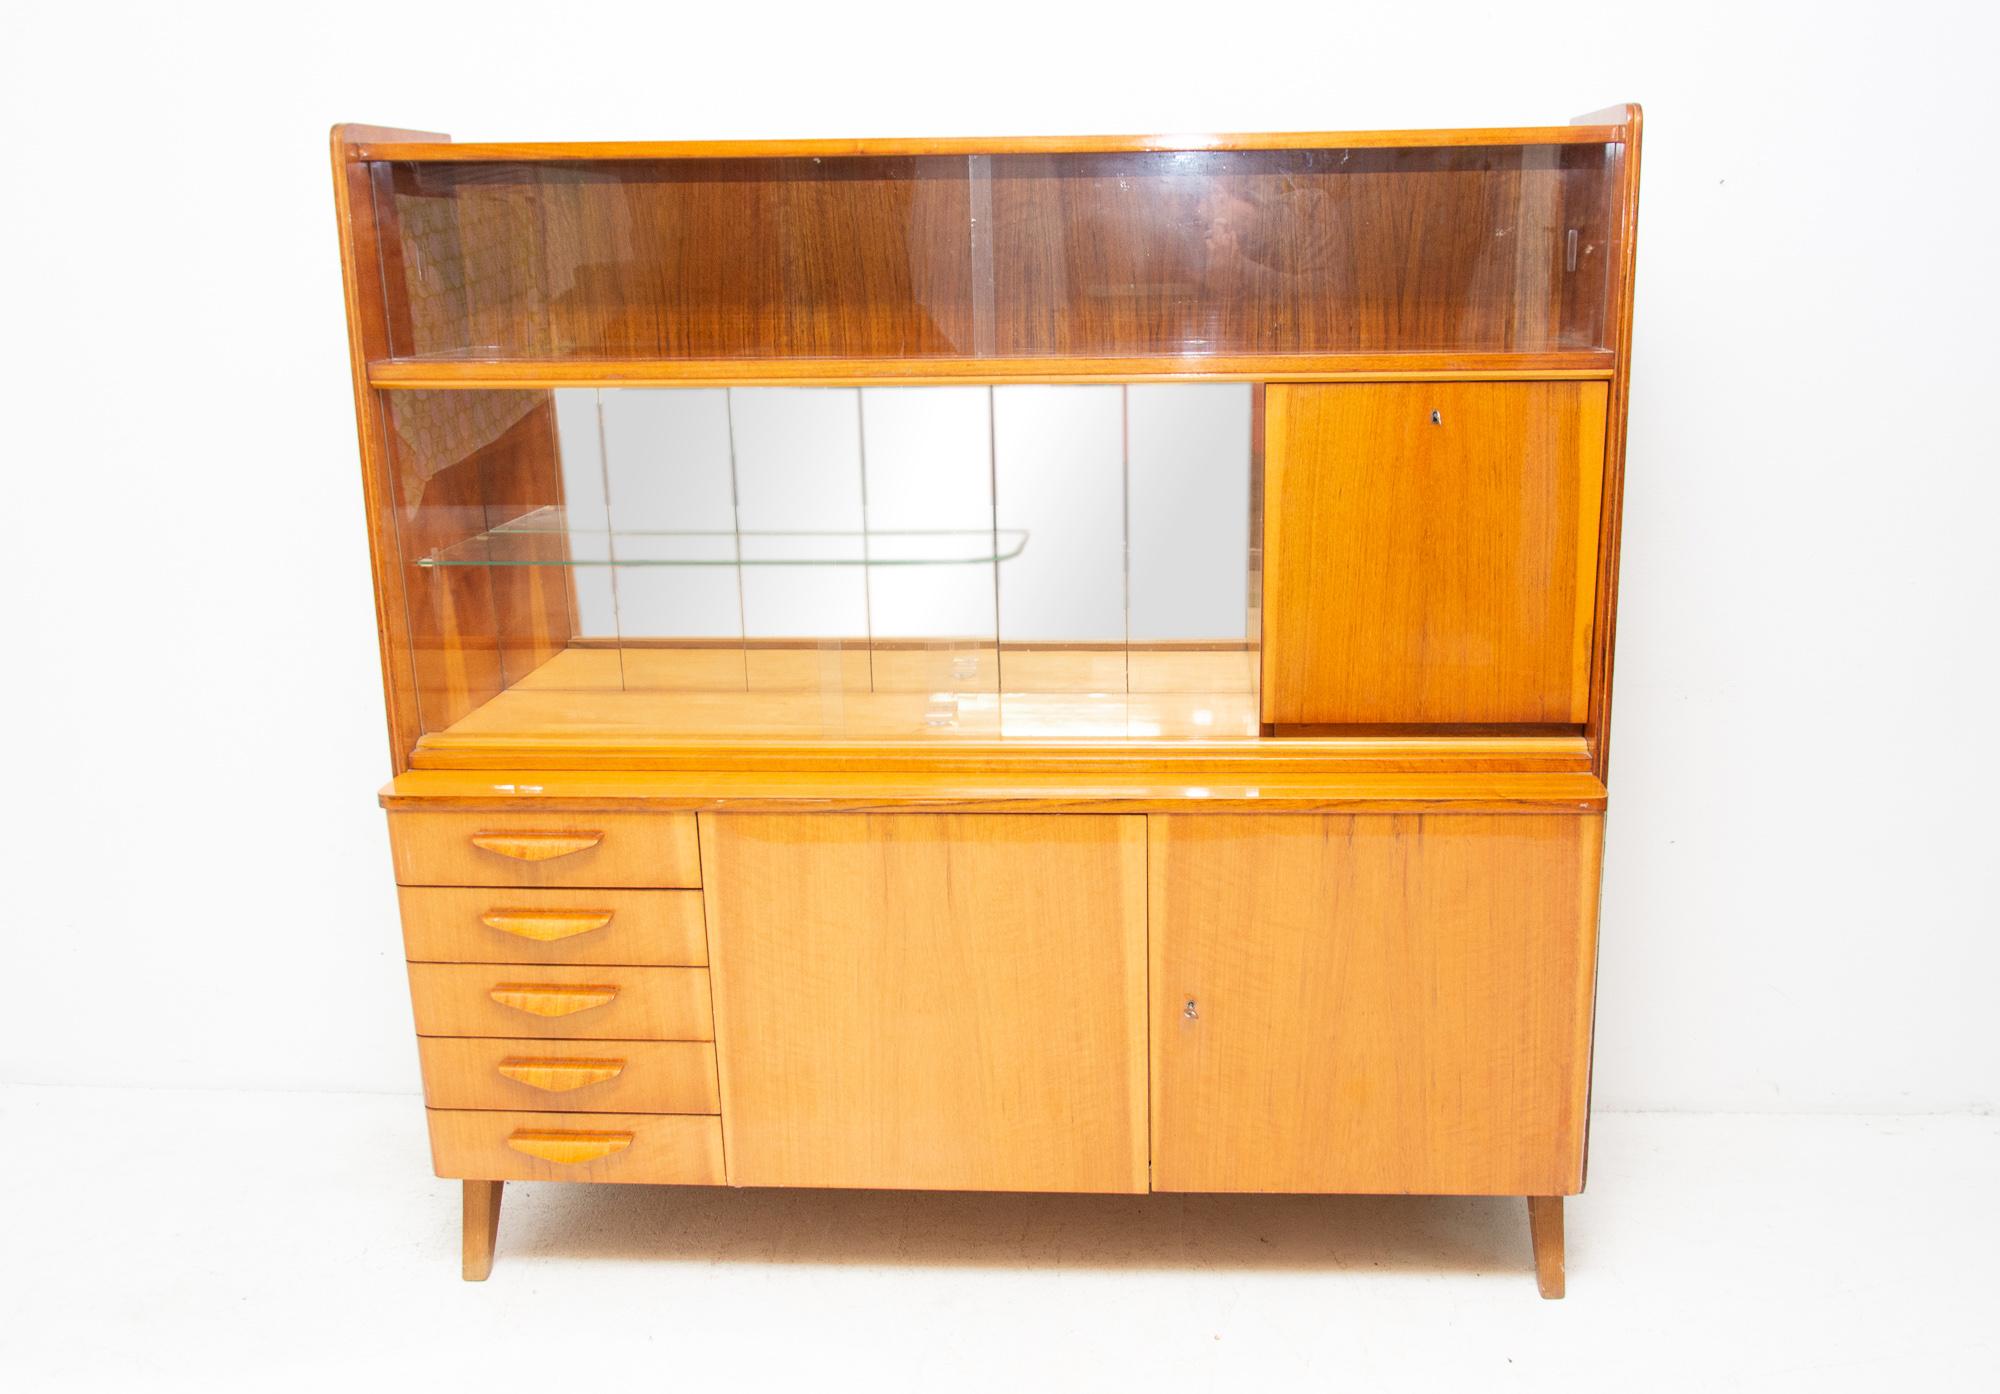 Midcentury vintage sideboard from the 1960s. It was designed by František Jirák and was manufactured by Tatra Nábytok Company in the former Czechoslovakia. Features a simple design, a glazed section can be used as a bar, bookcase etc. In very good